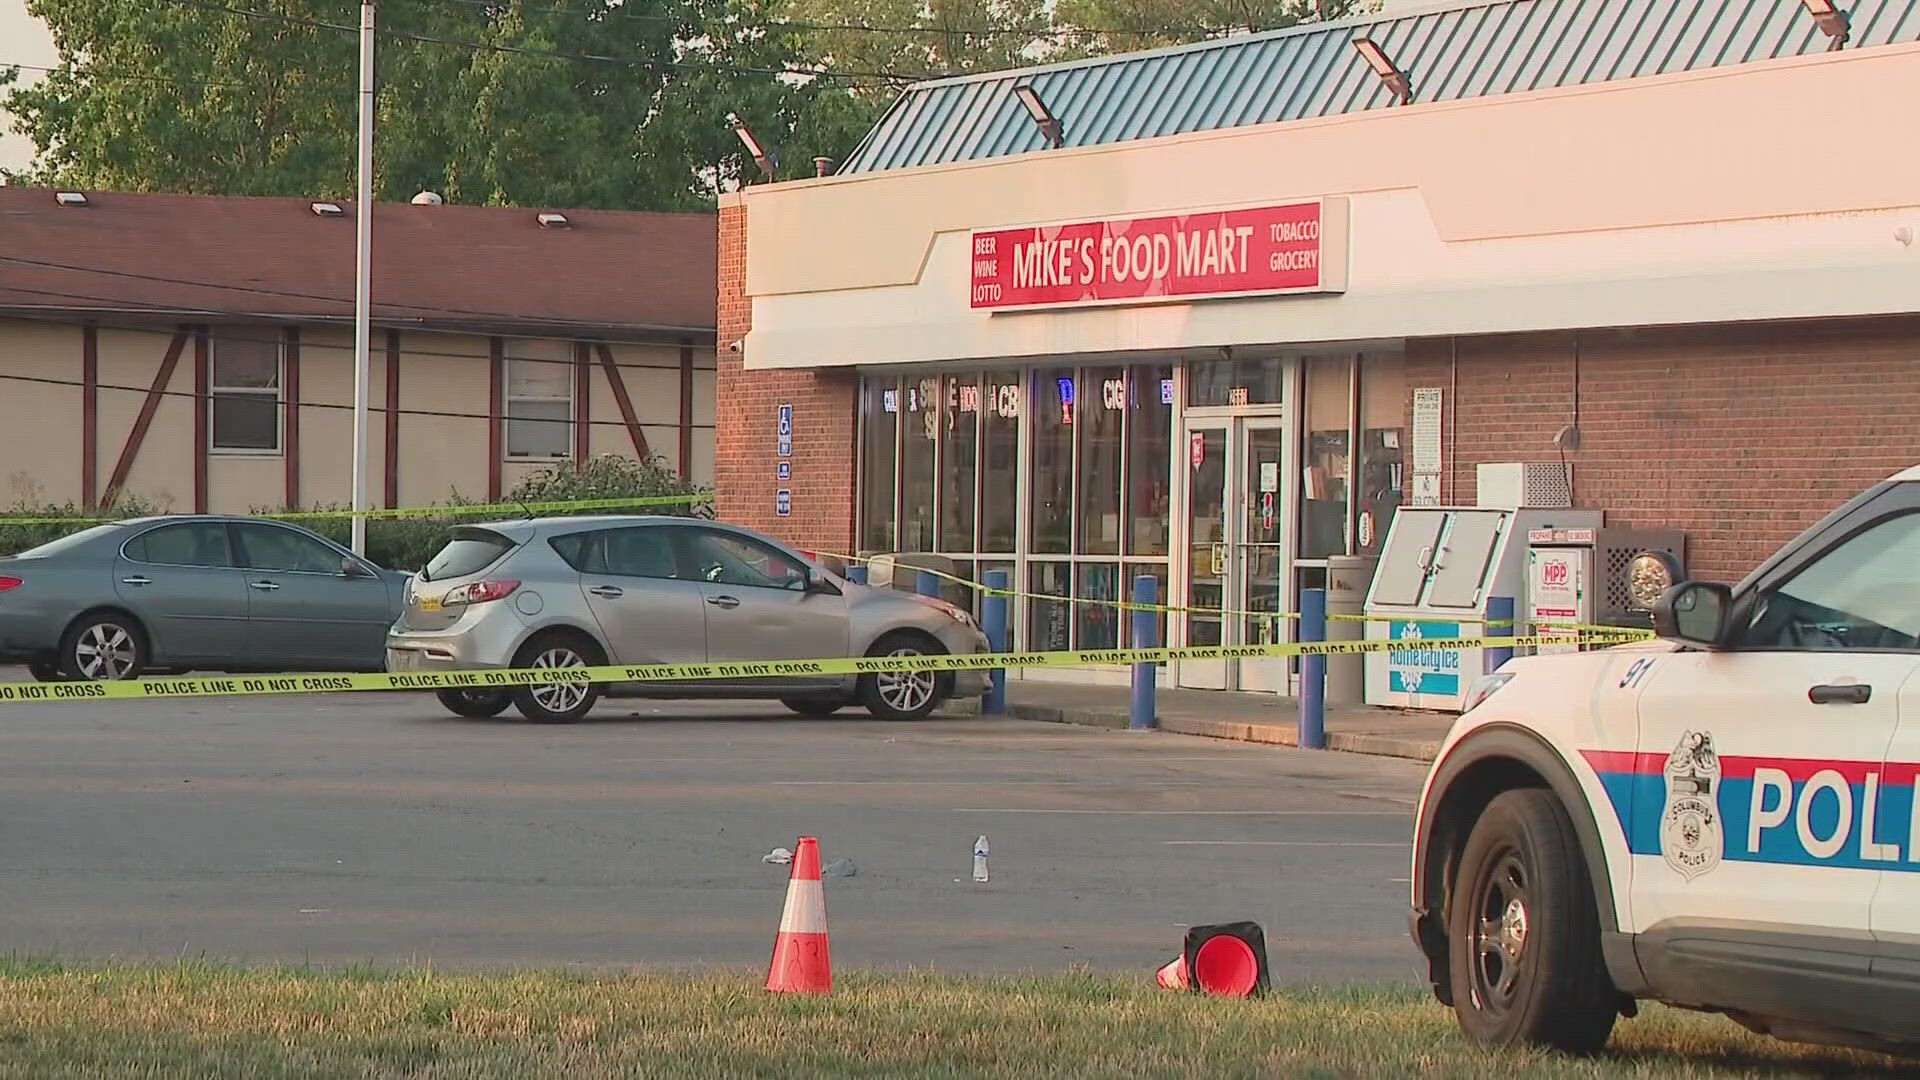 Police did not provide additional information about a suspect or what led up to the shooting.